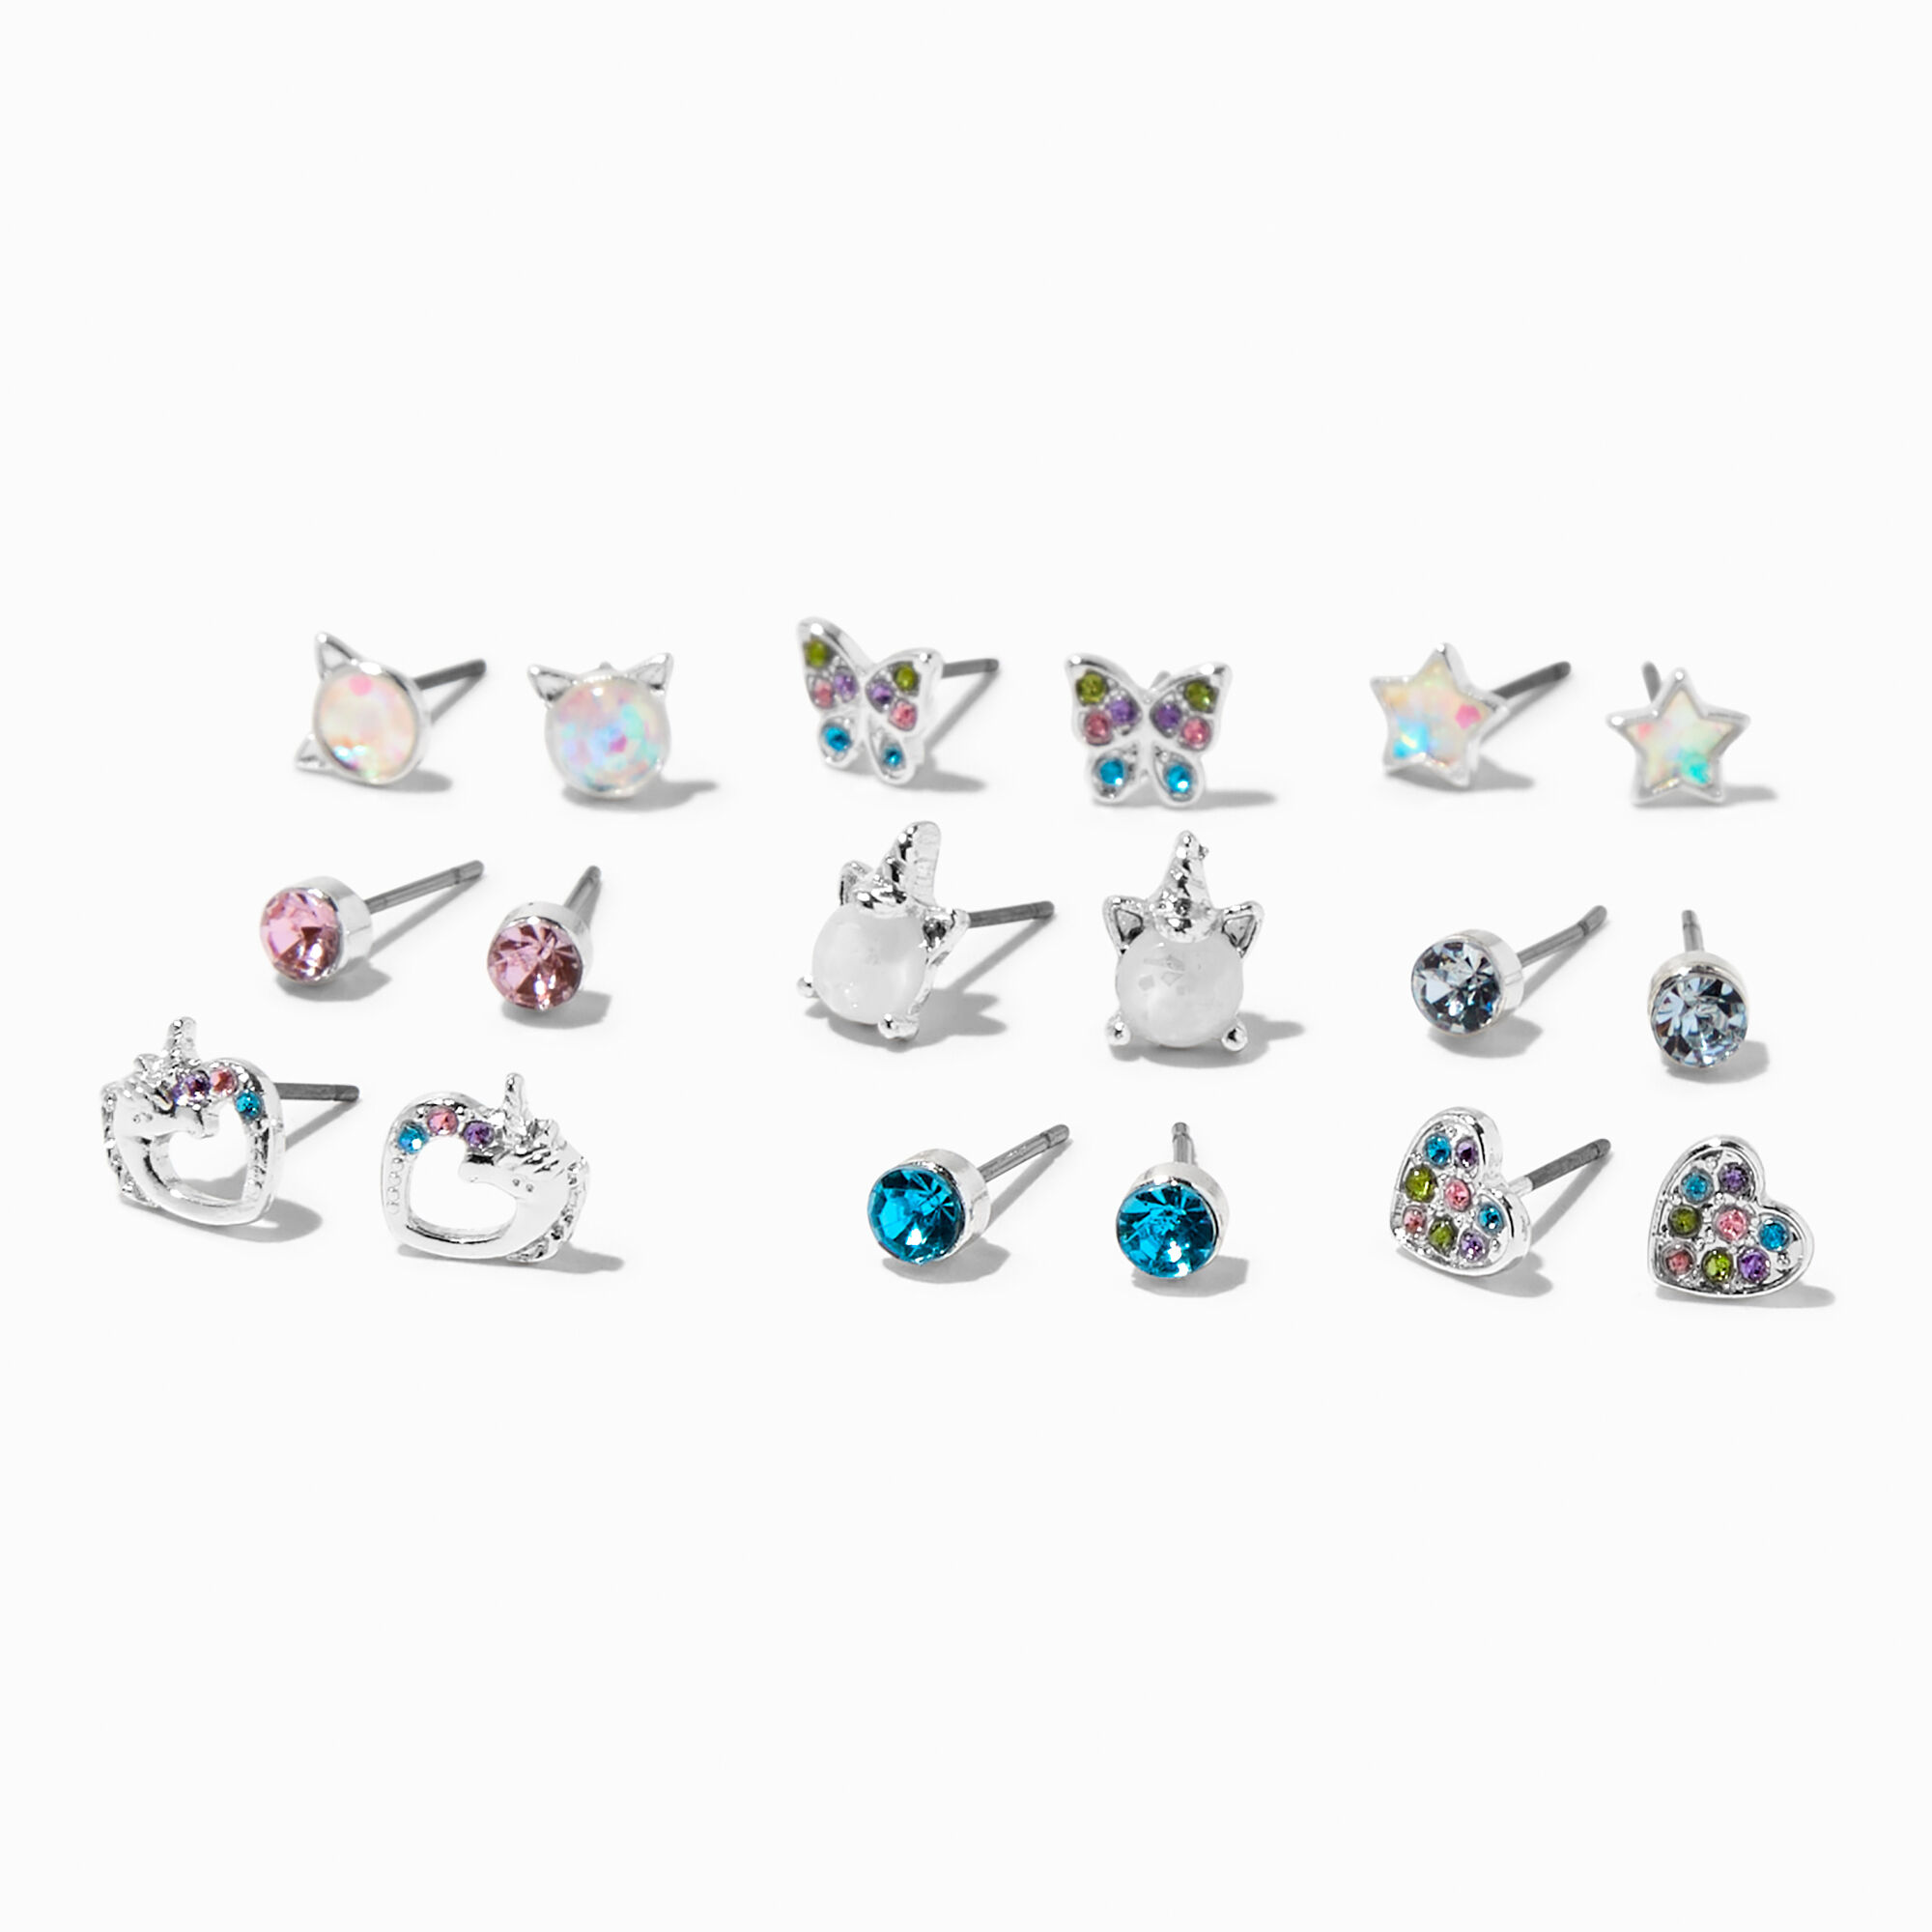 View Claires Tone Crystal Unicorns Stud Earrings 9 Pack Silver information